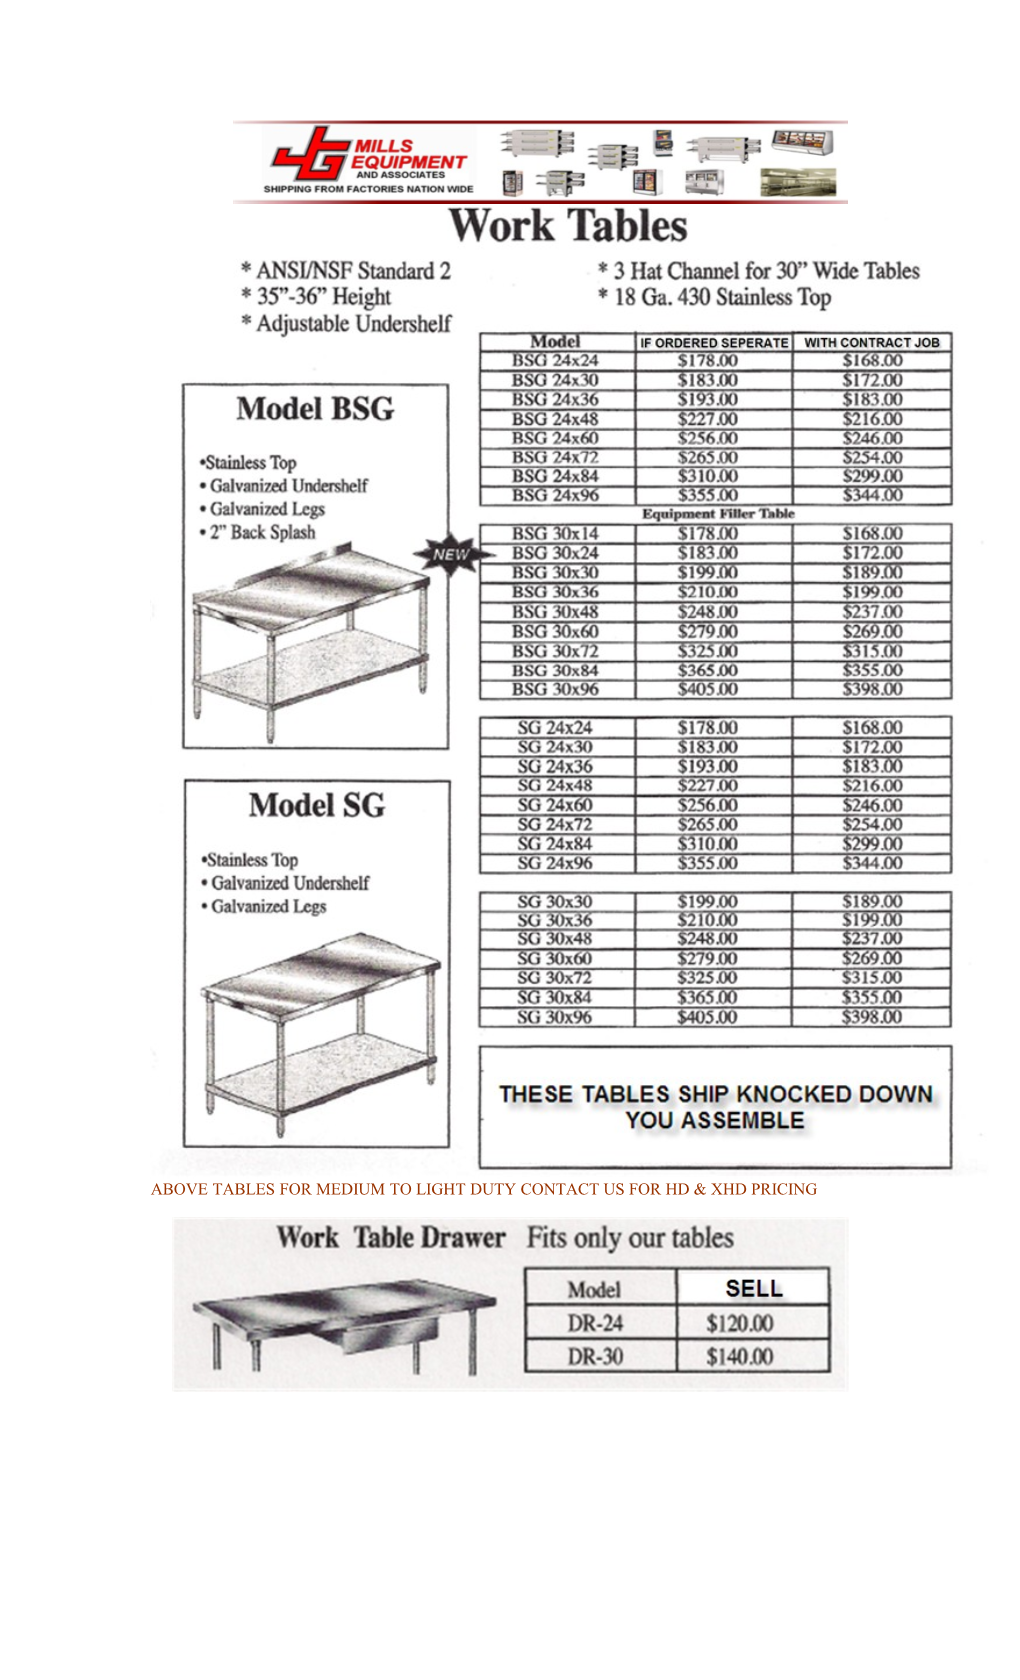 Hd and X-Hd Tables Available in Any Demensions You Want